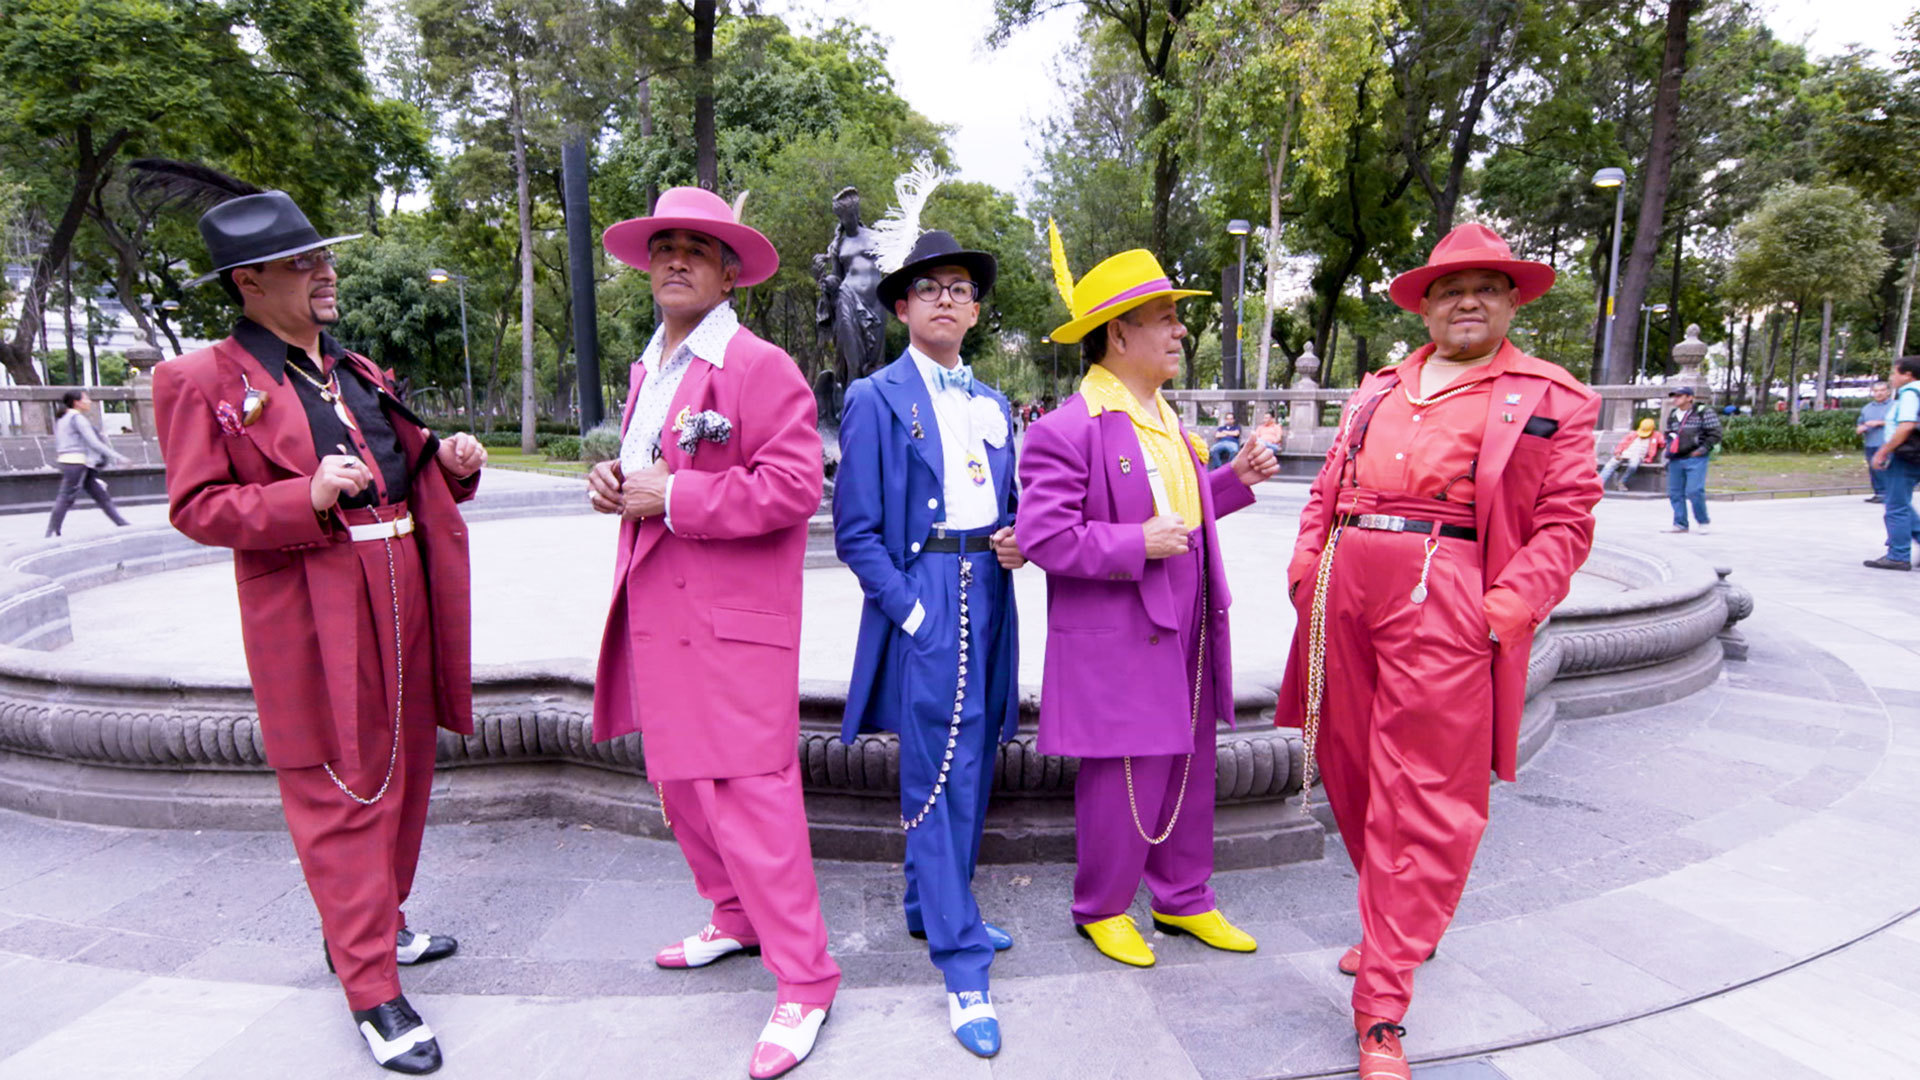 zoot suit: most expensive suits in the world